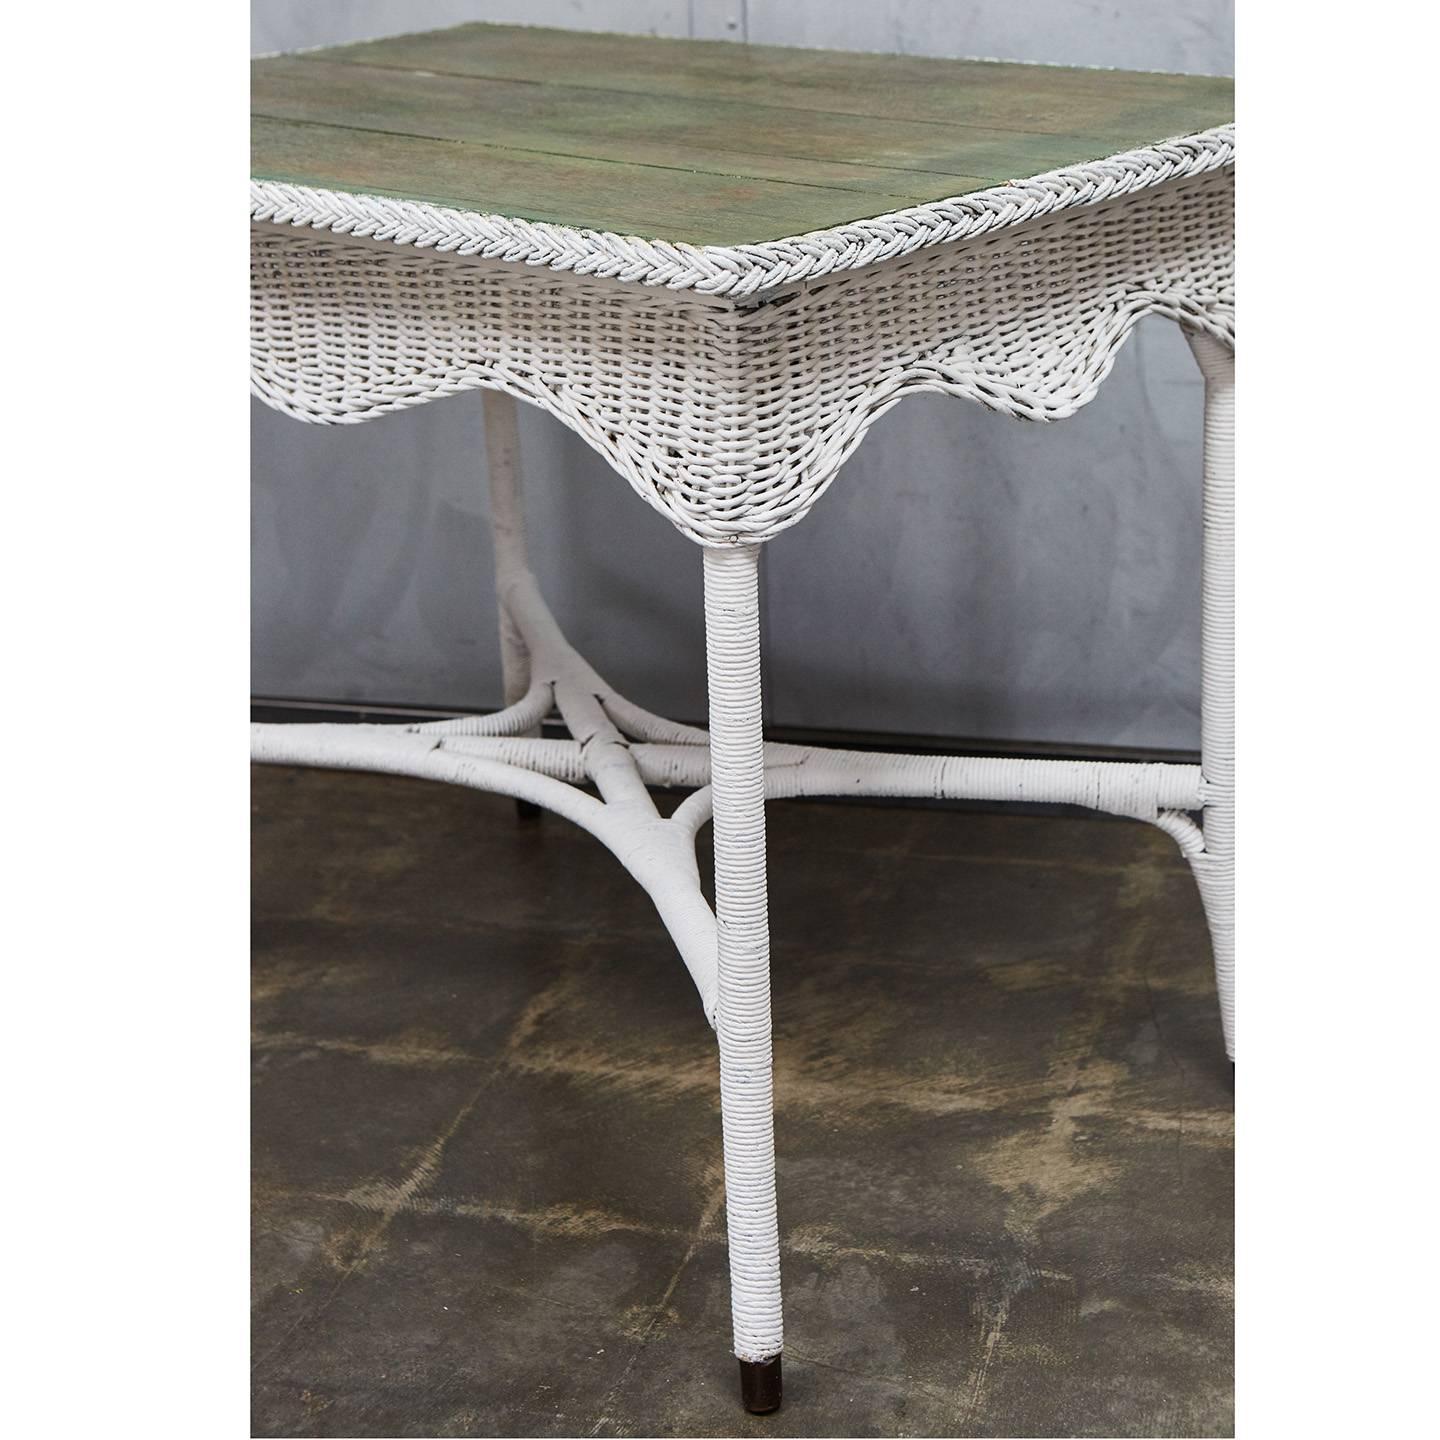 This nice wicker table has a veneer top that has remnants of paint leaving a nice jade green finish. This charming piece also has a scalloped skirt and splayed feet with metal tips.